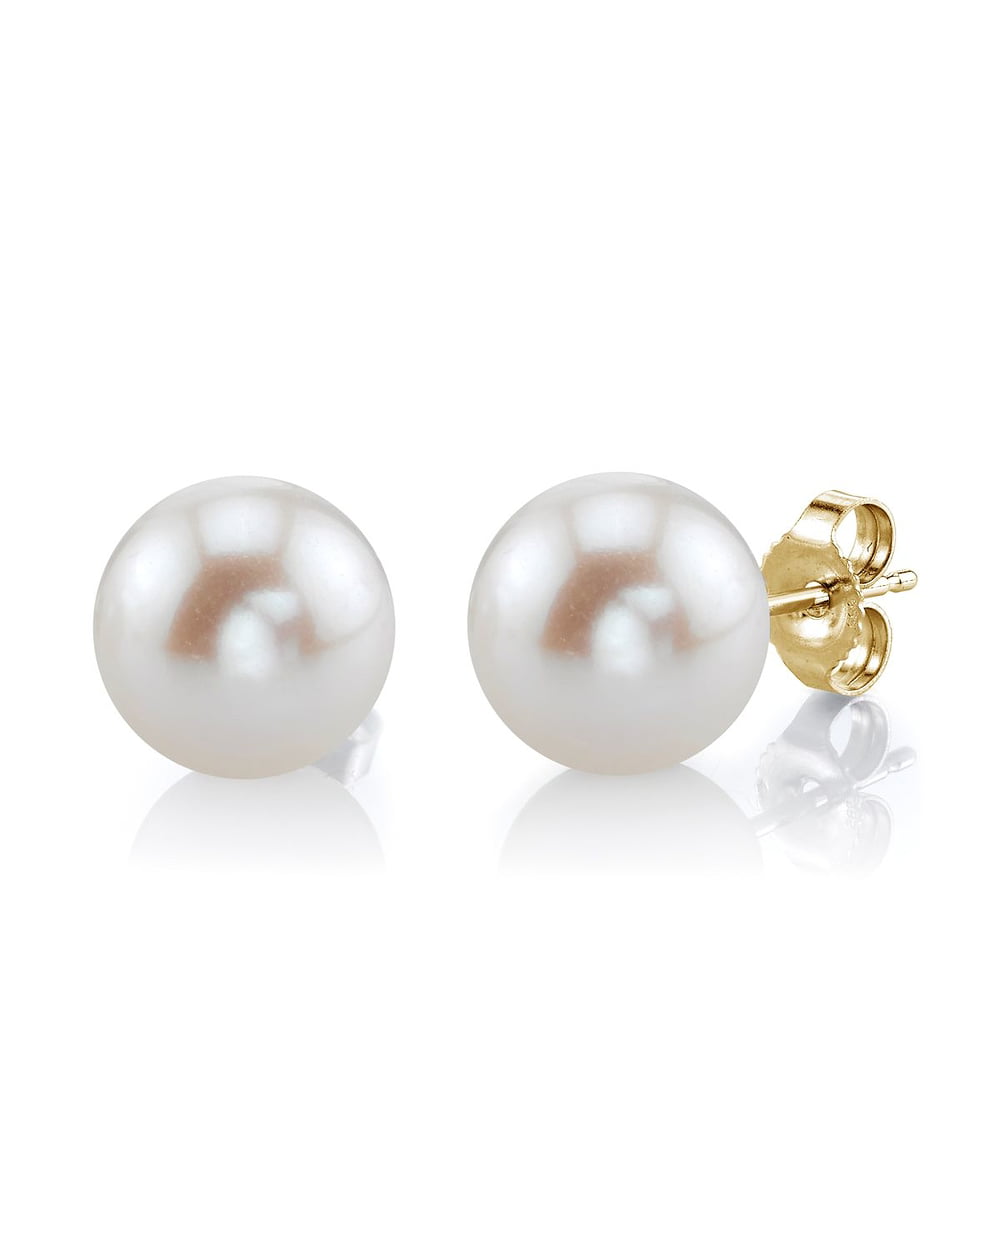 9-10mm Freshwater Pearl Beads White Gold Plate Frame Fashion Stud Earrings1 Pair 